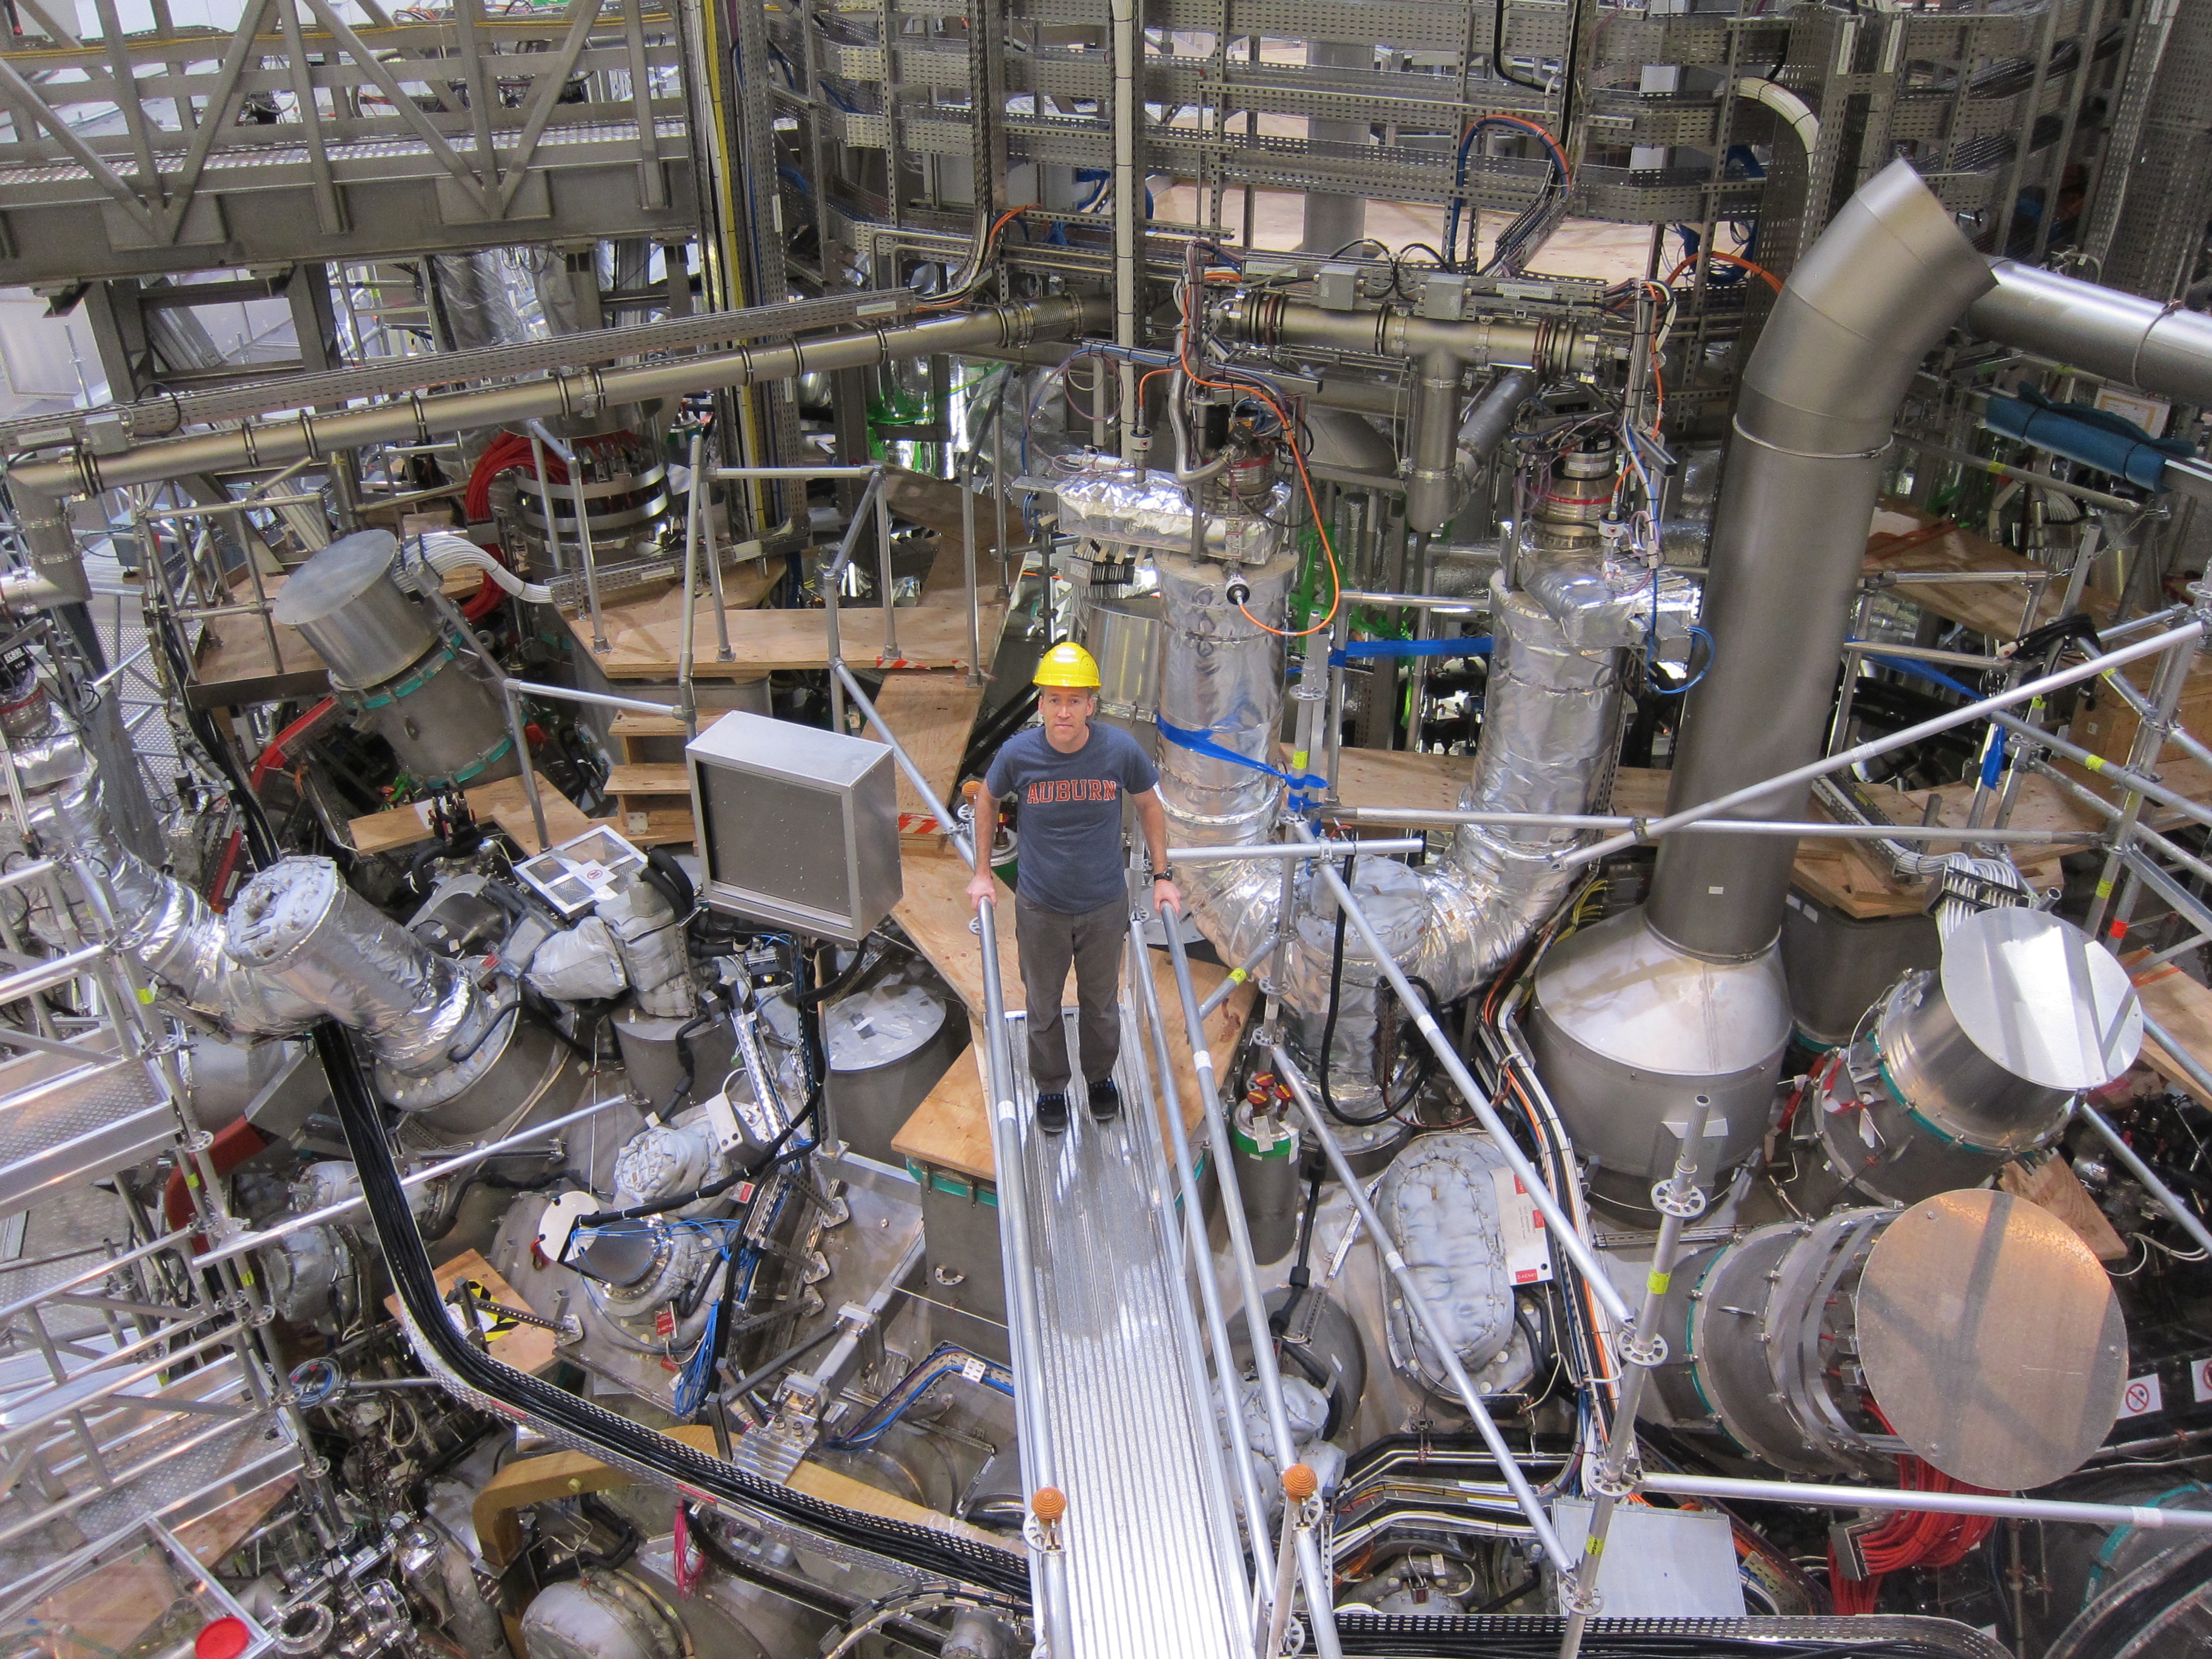 Dr. David Ennis standing on top of the Wendelstein 7-X experiment.